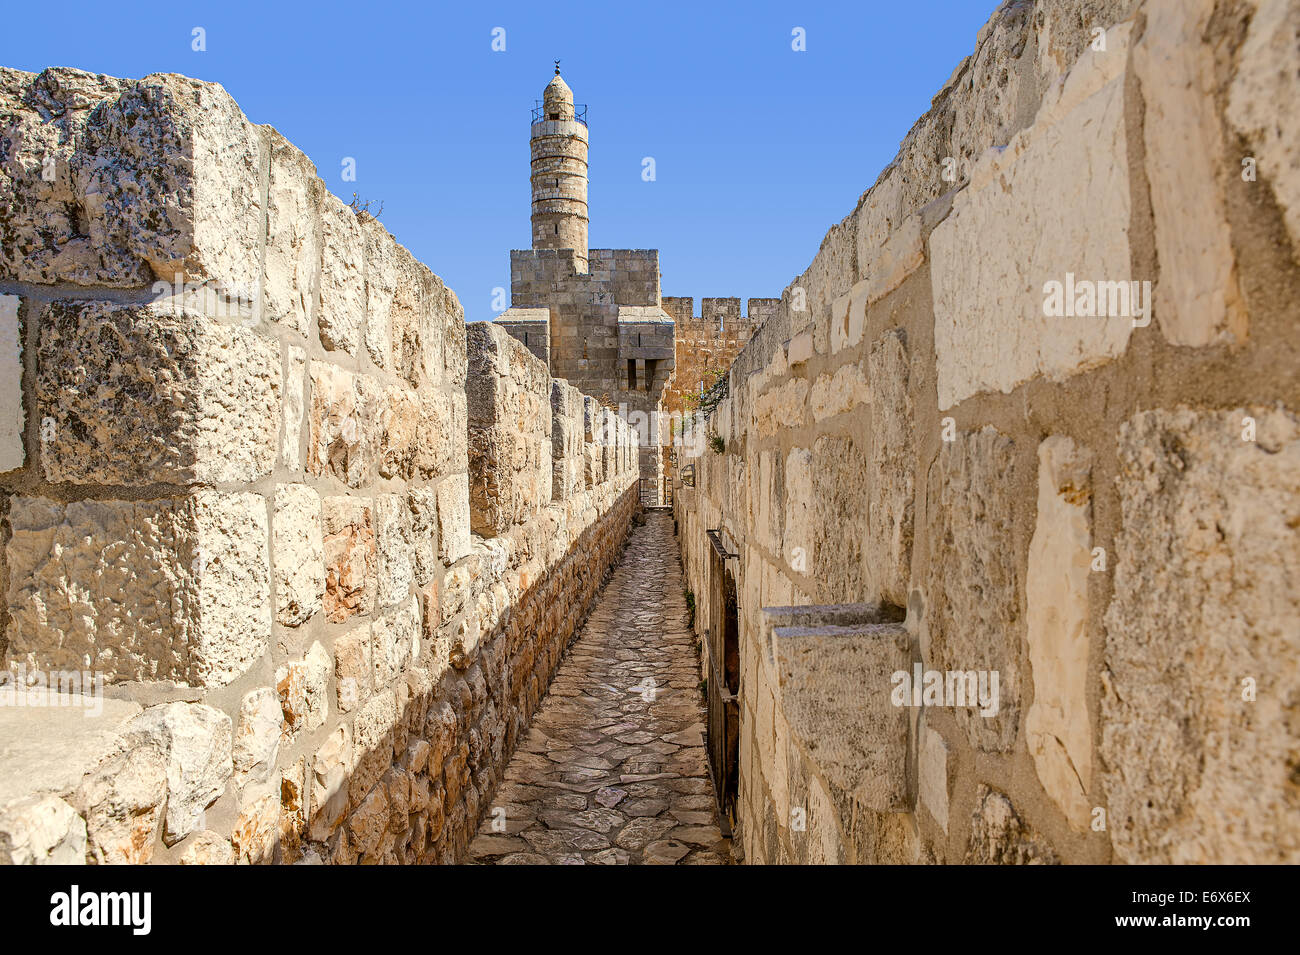 Tower of David and ancient walls in Old City of Jerusalem, Israel. Stock Photo